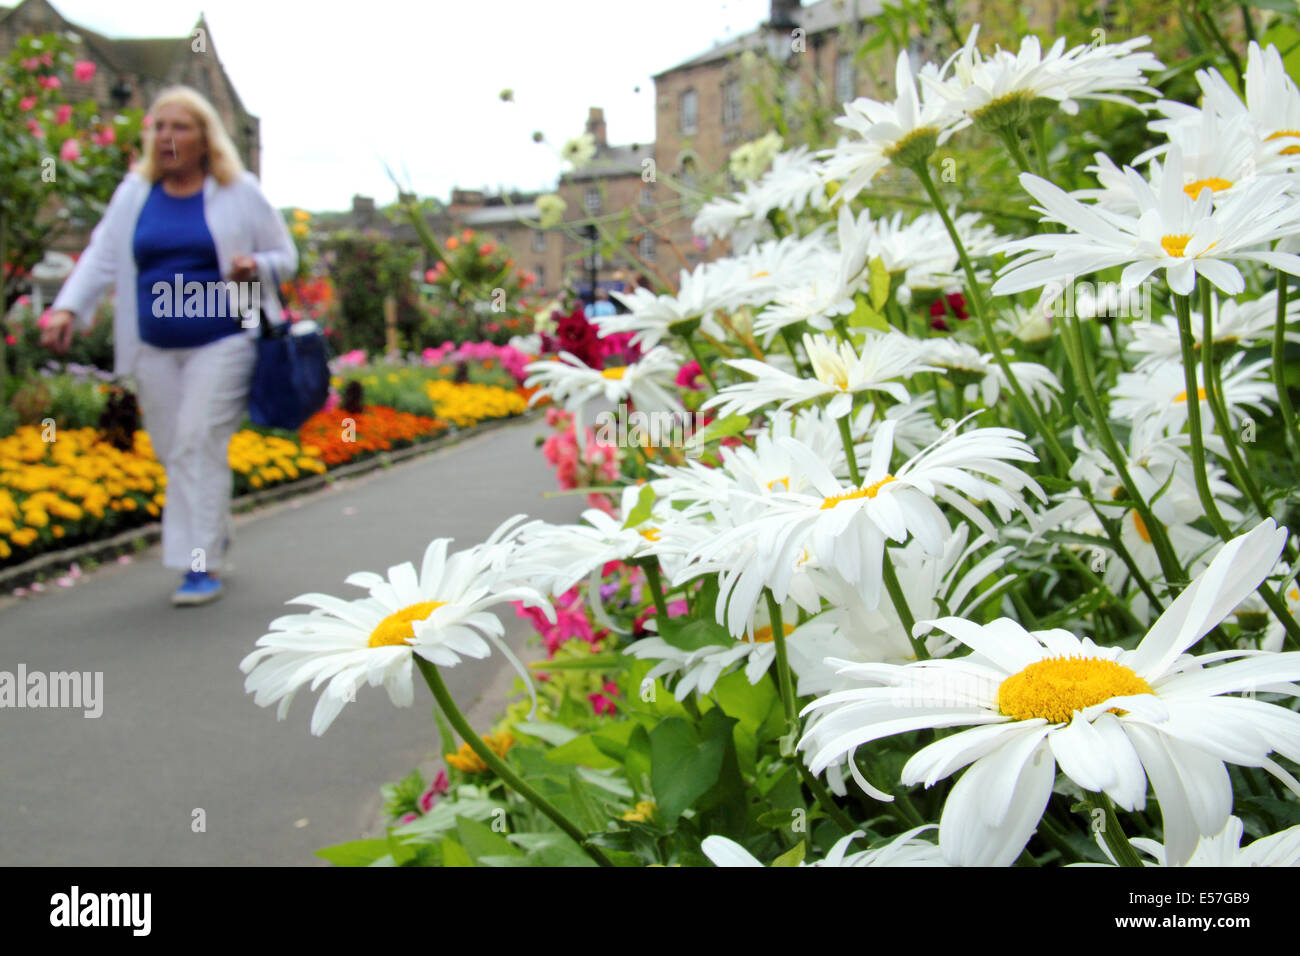 Summer borders in full bloom at Bath Gardens in Bakewell, a pretty market town in the Peak District National Park, Derbyshire UK Stock Photo